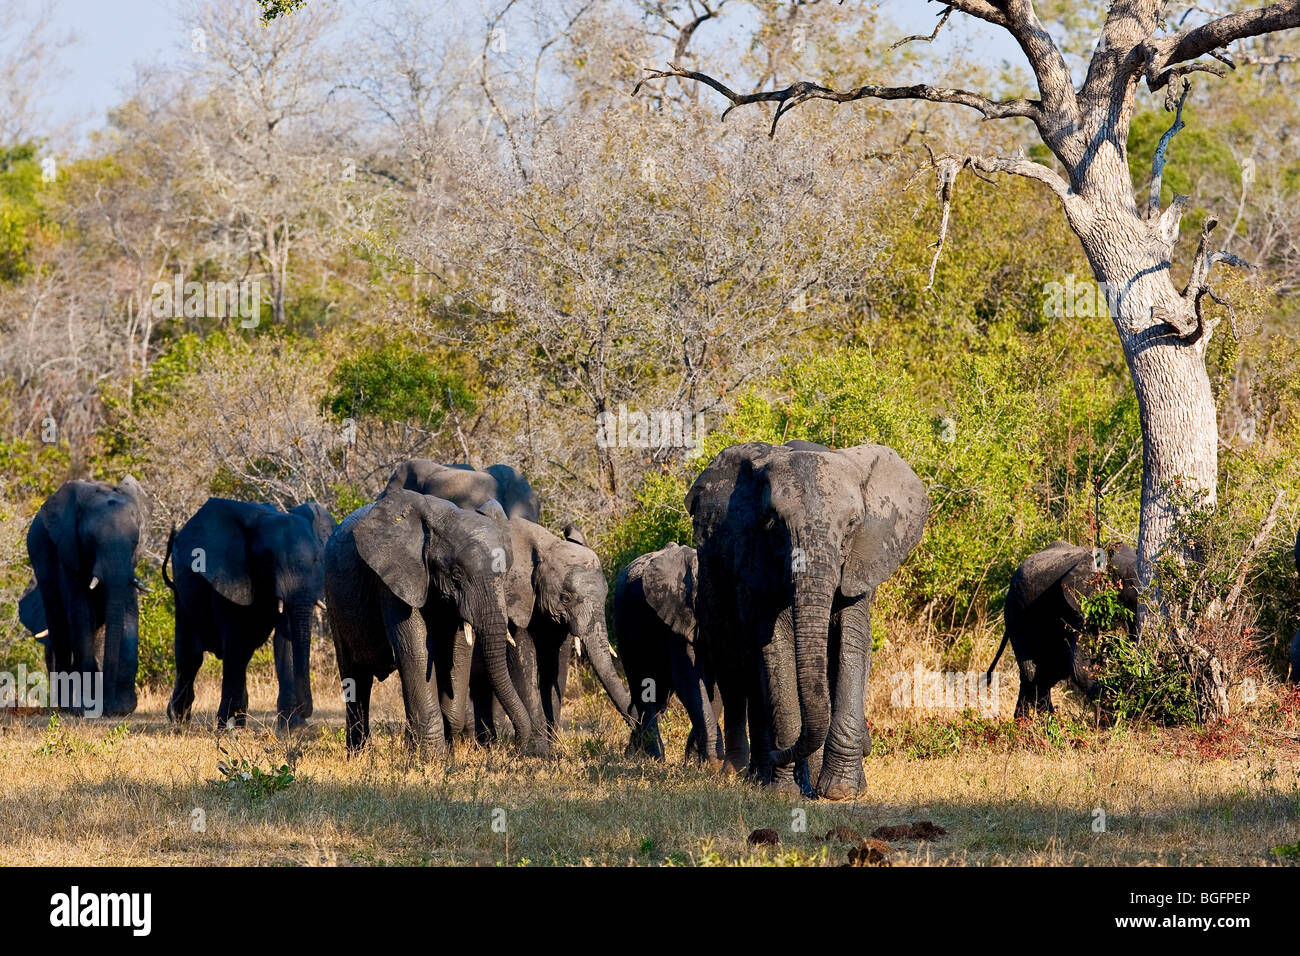 Elephant herd walking towards camera with baby protected between large adult females Stock Photo